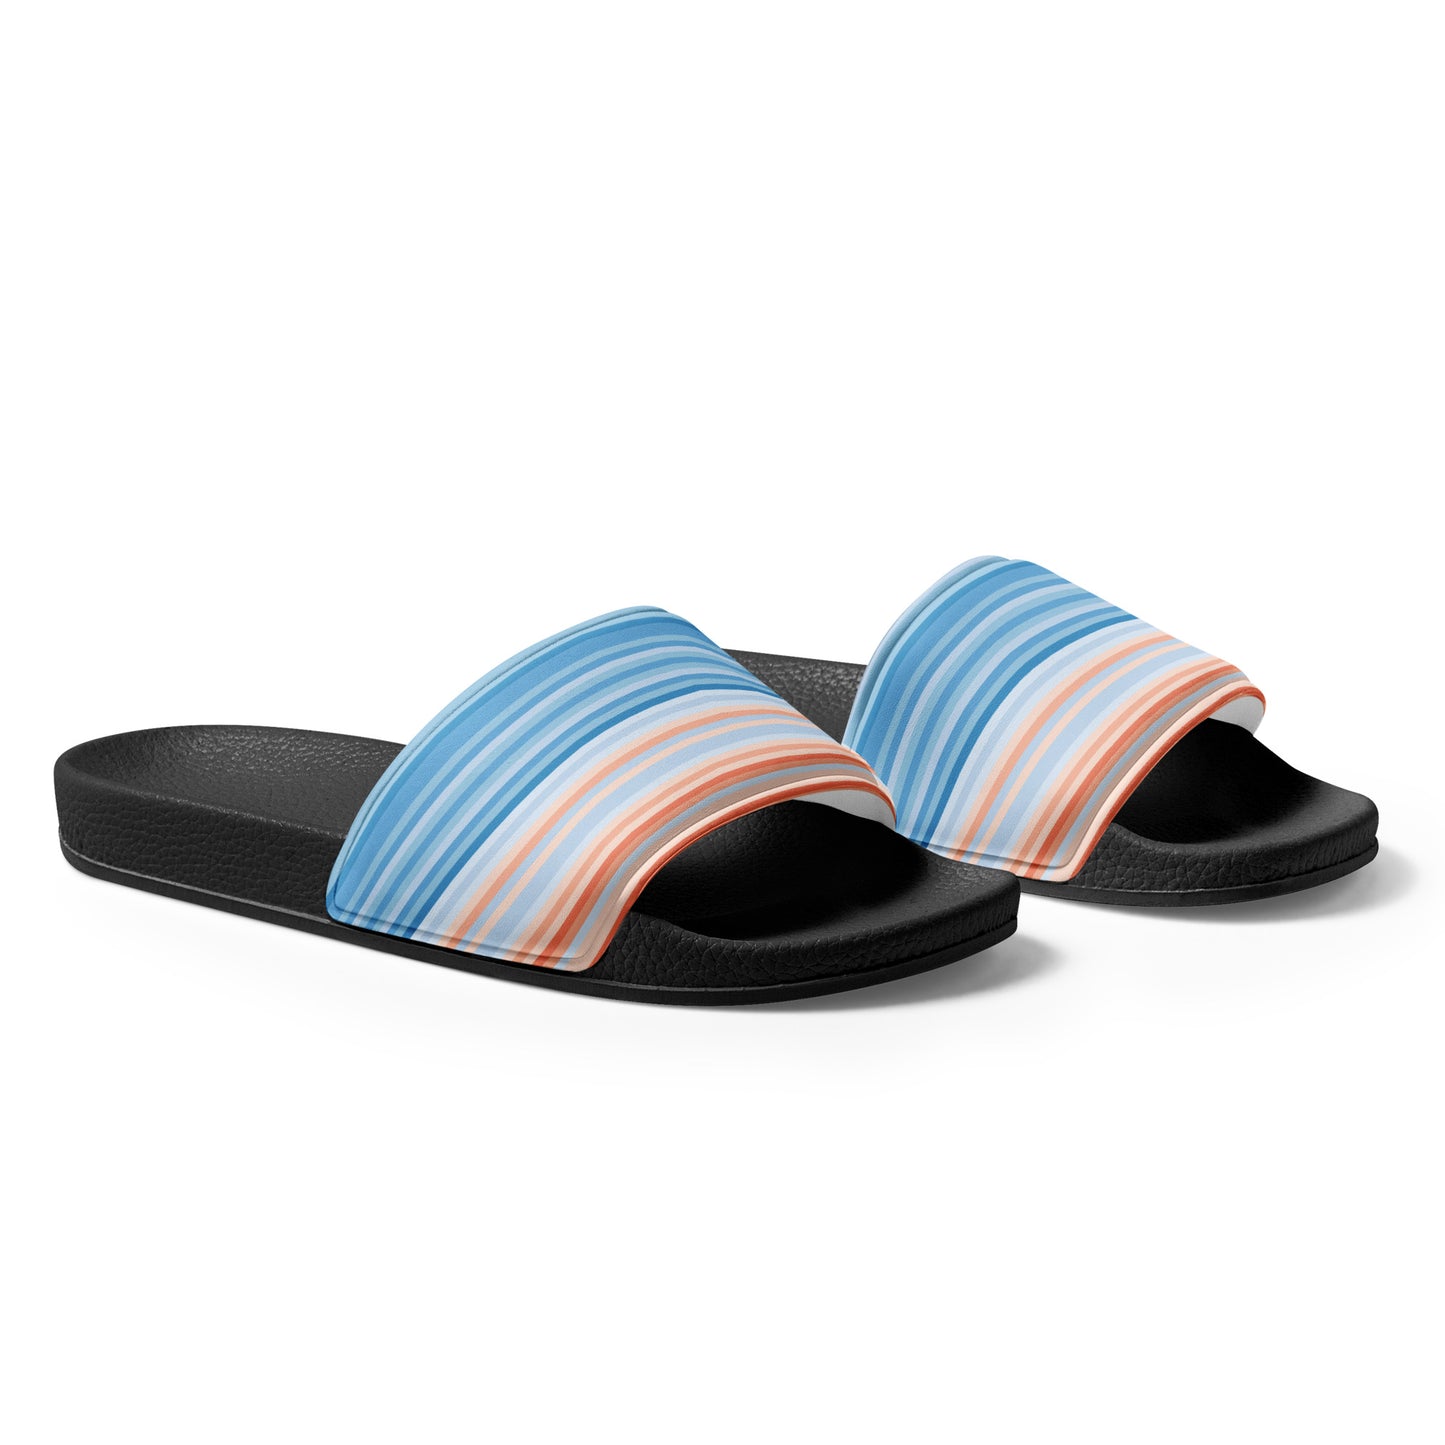 Climate Change Global Warming Stripes - Sustainably Made Women's slides